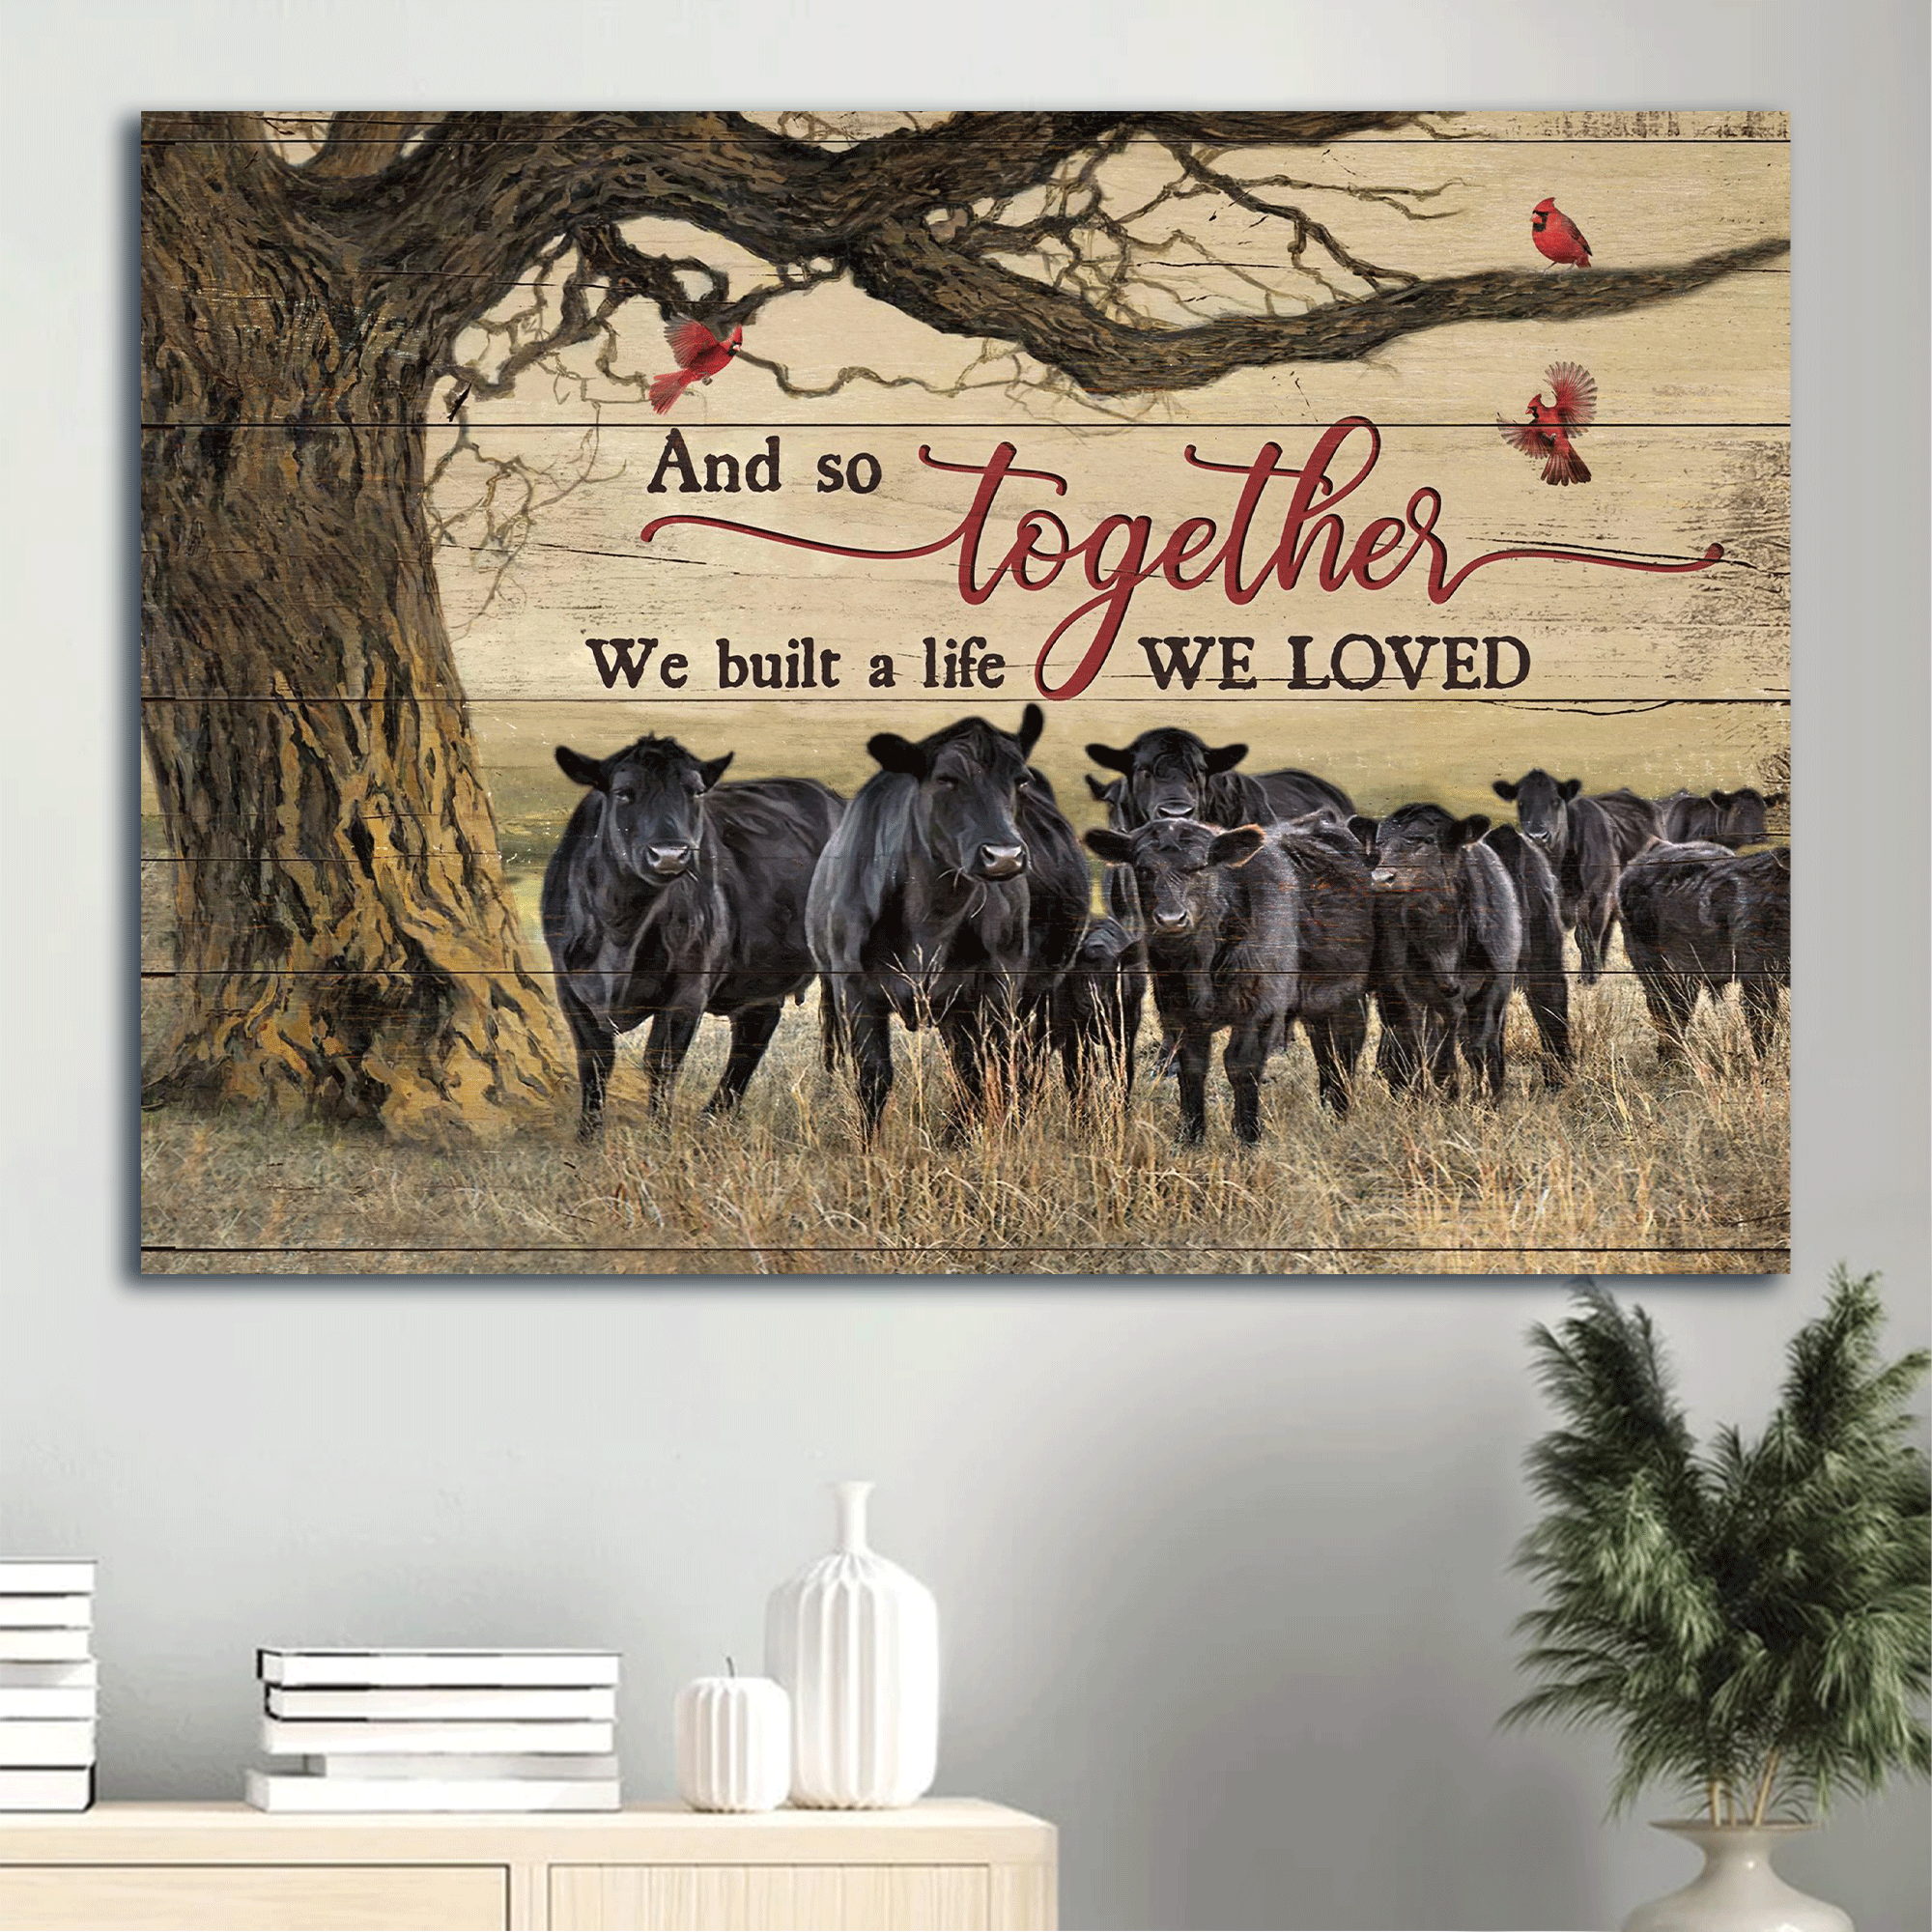 Jesus Landscape Canvas- Black cow drawing, Red cardinal- Gift for Christian- And so together we built a life we loved - Landscape Canvas Prints, Wall Art